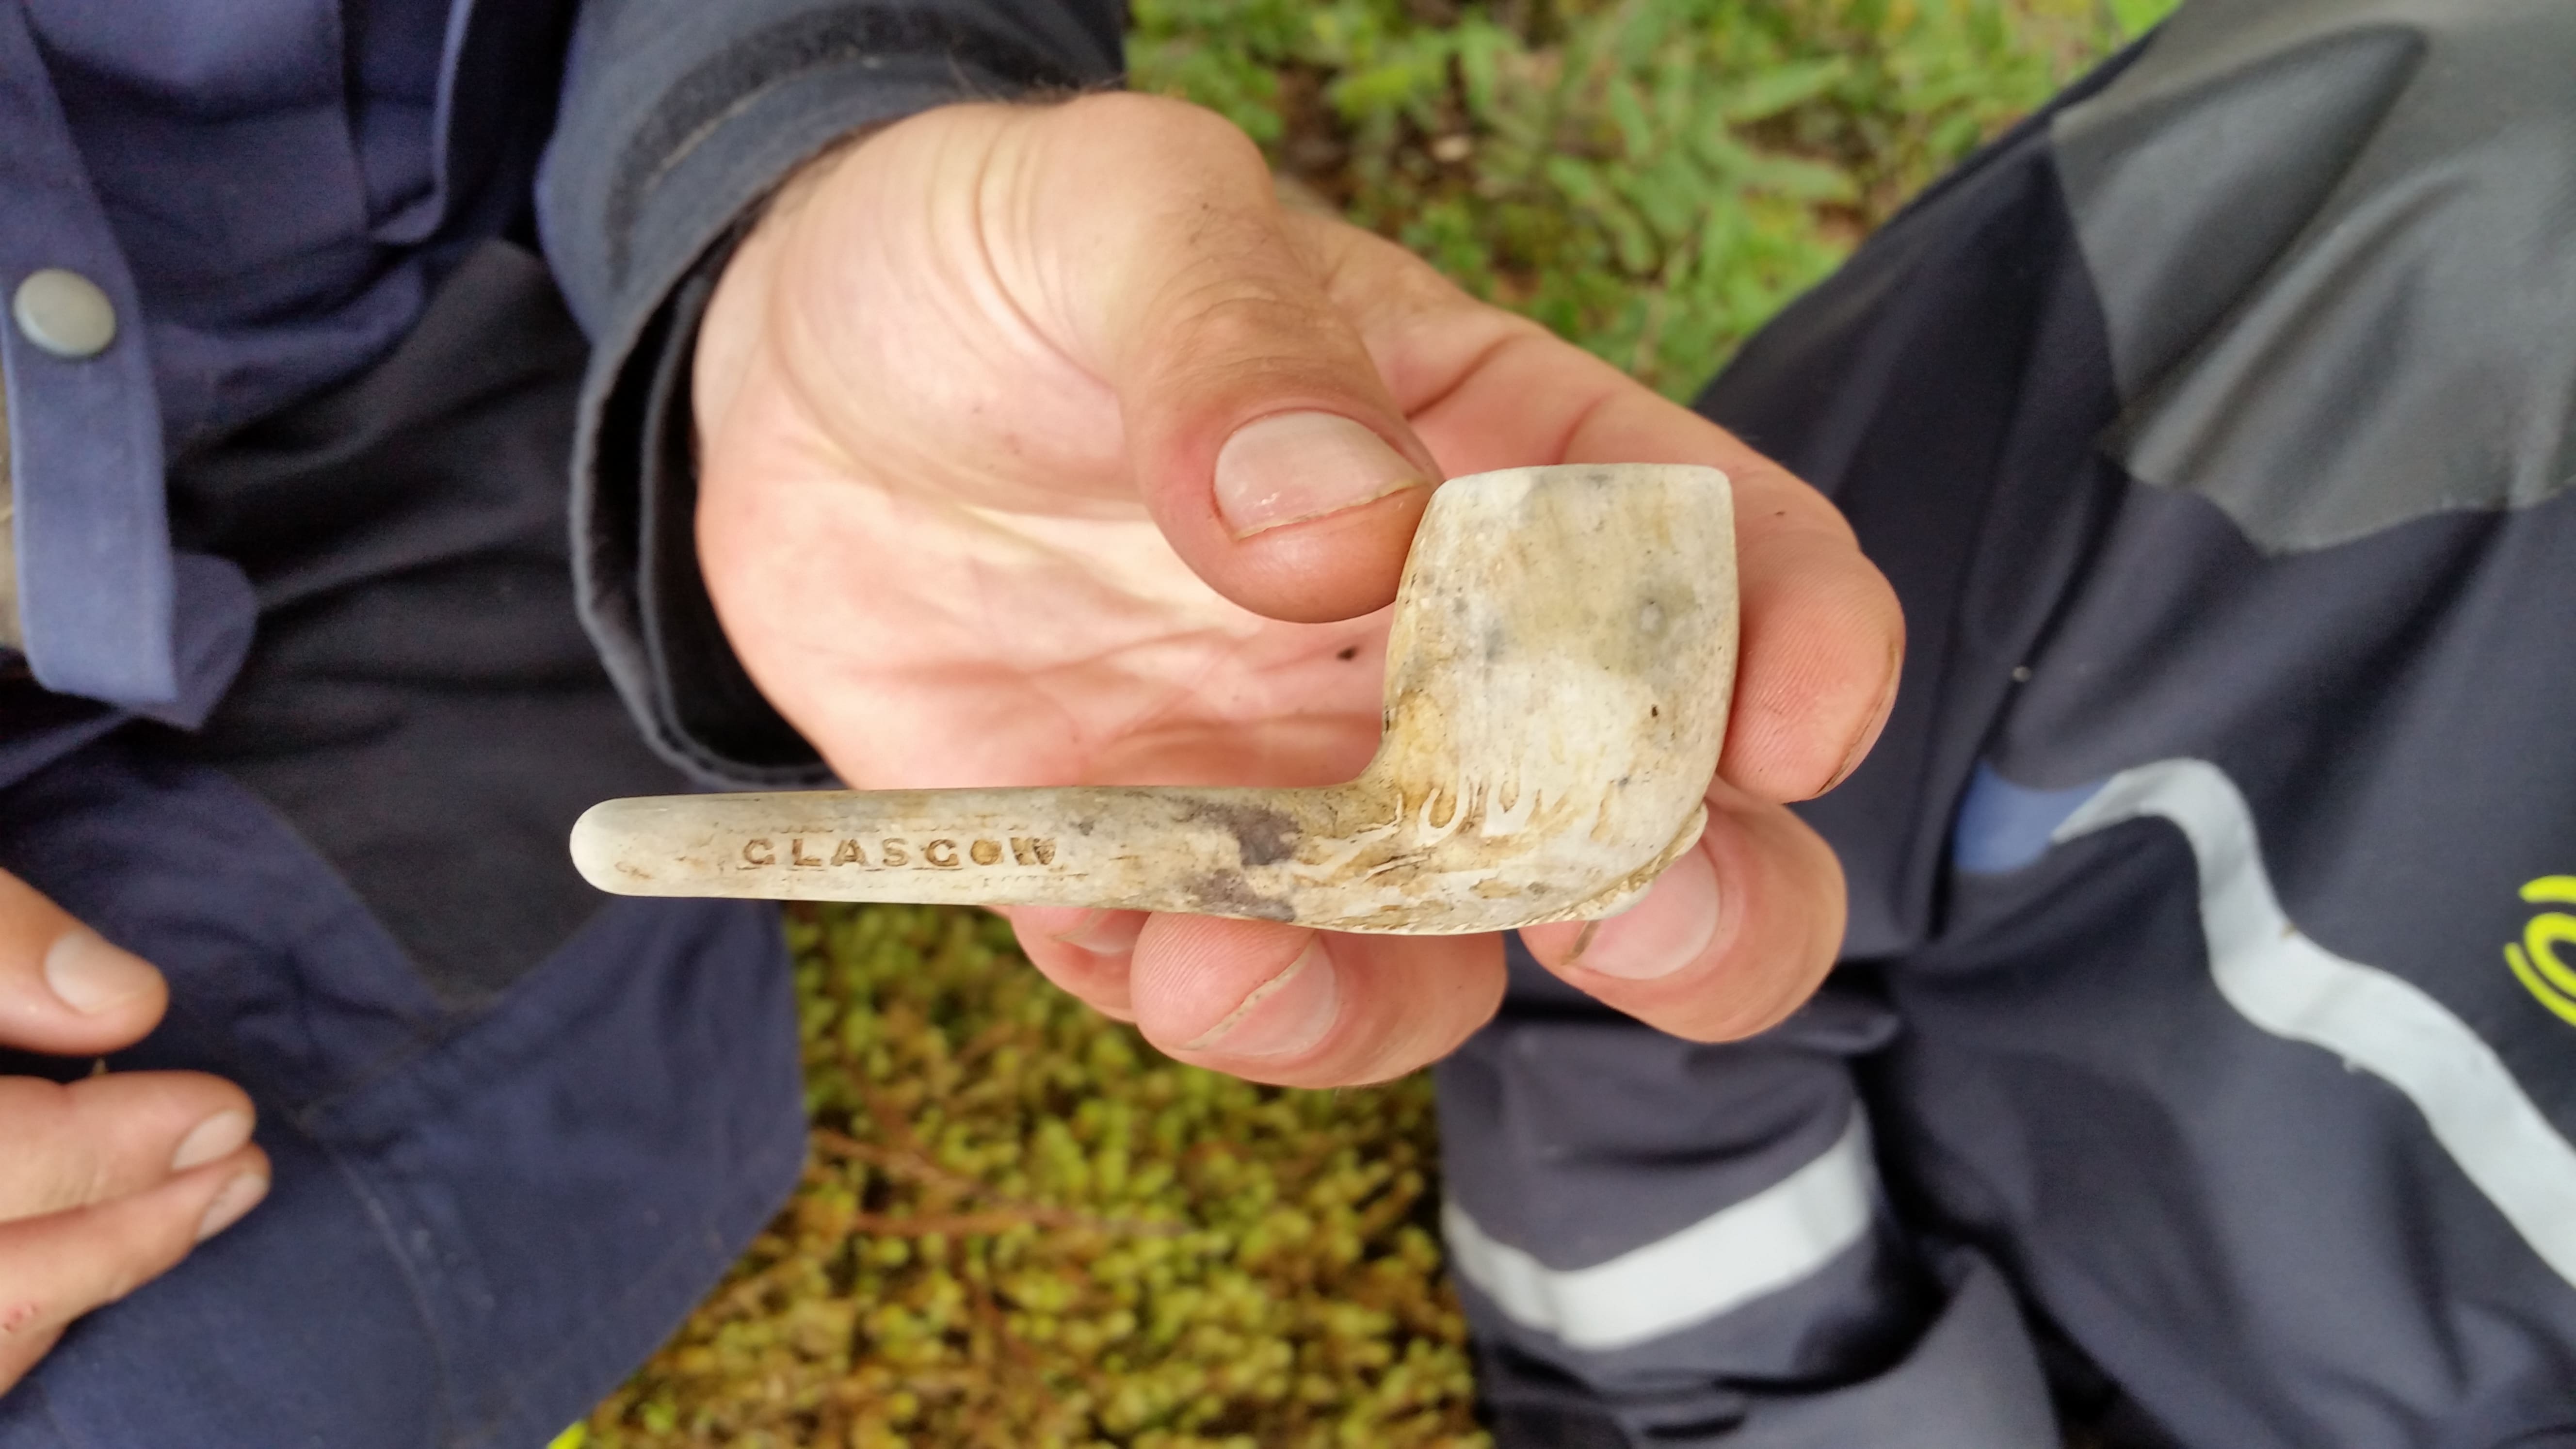 Historic clay smoker's pipe in hand